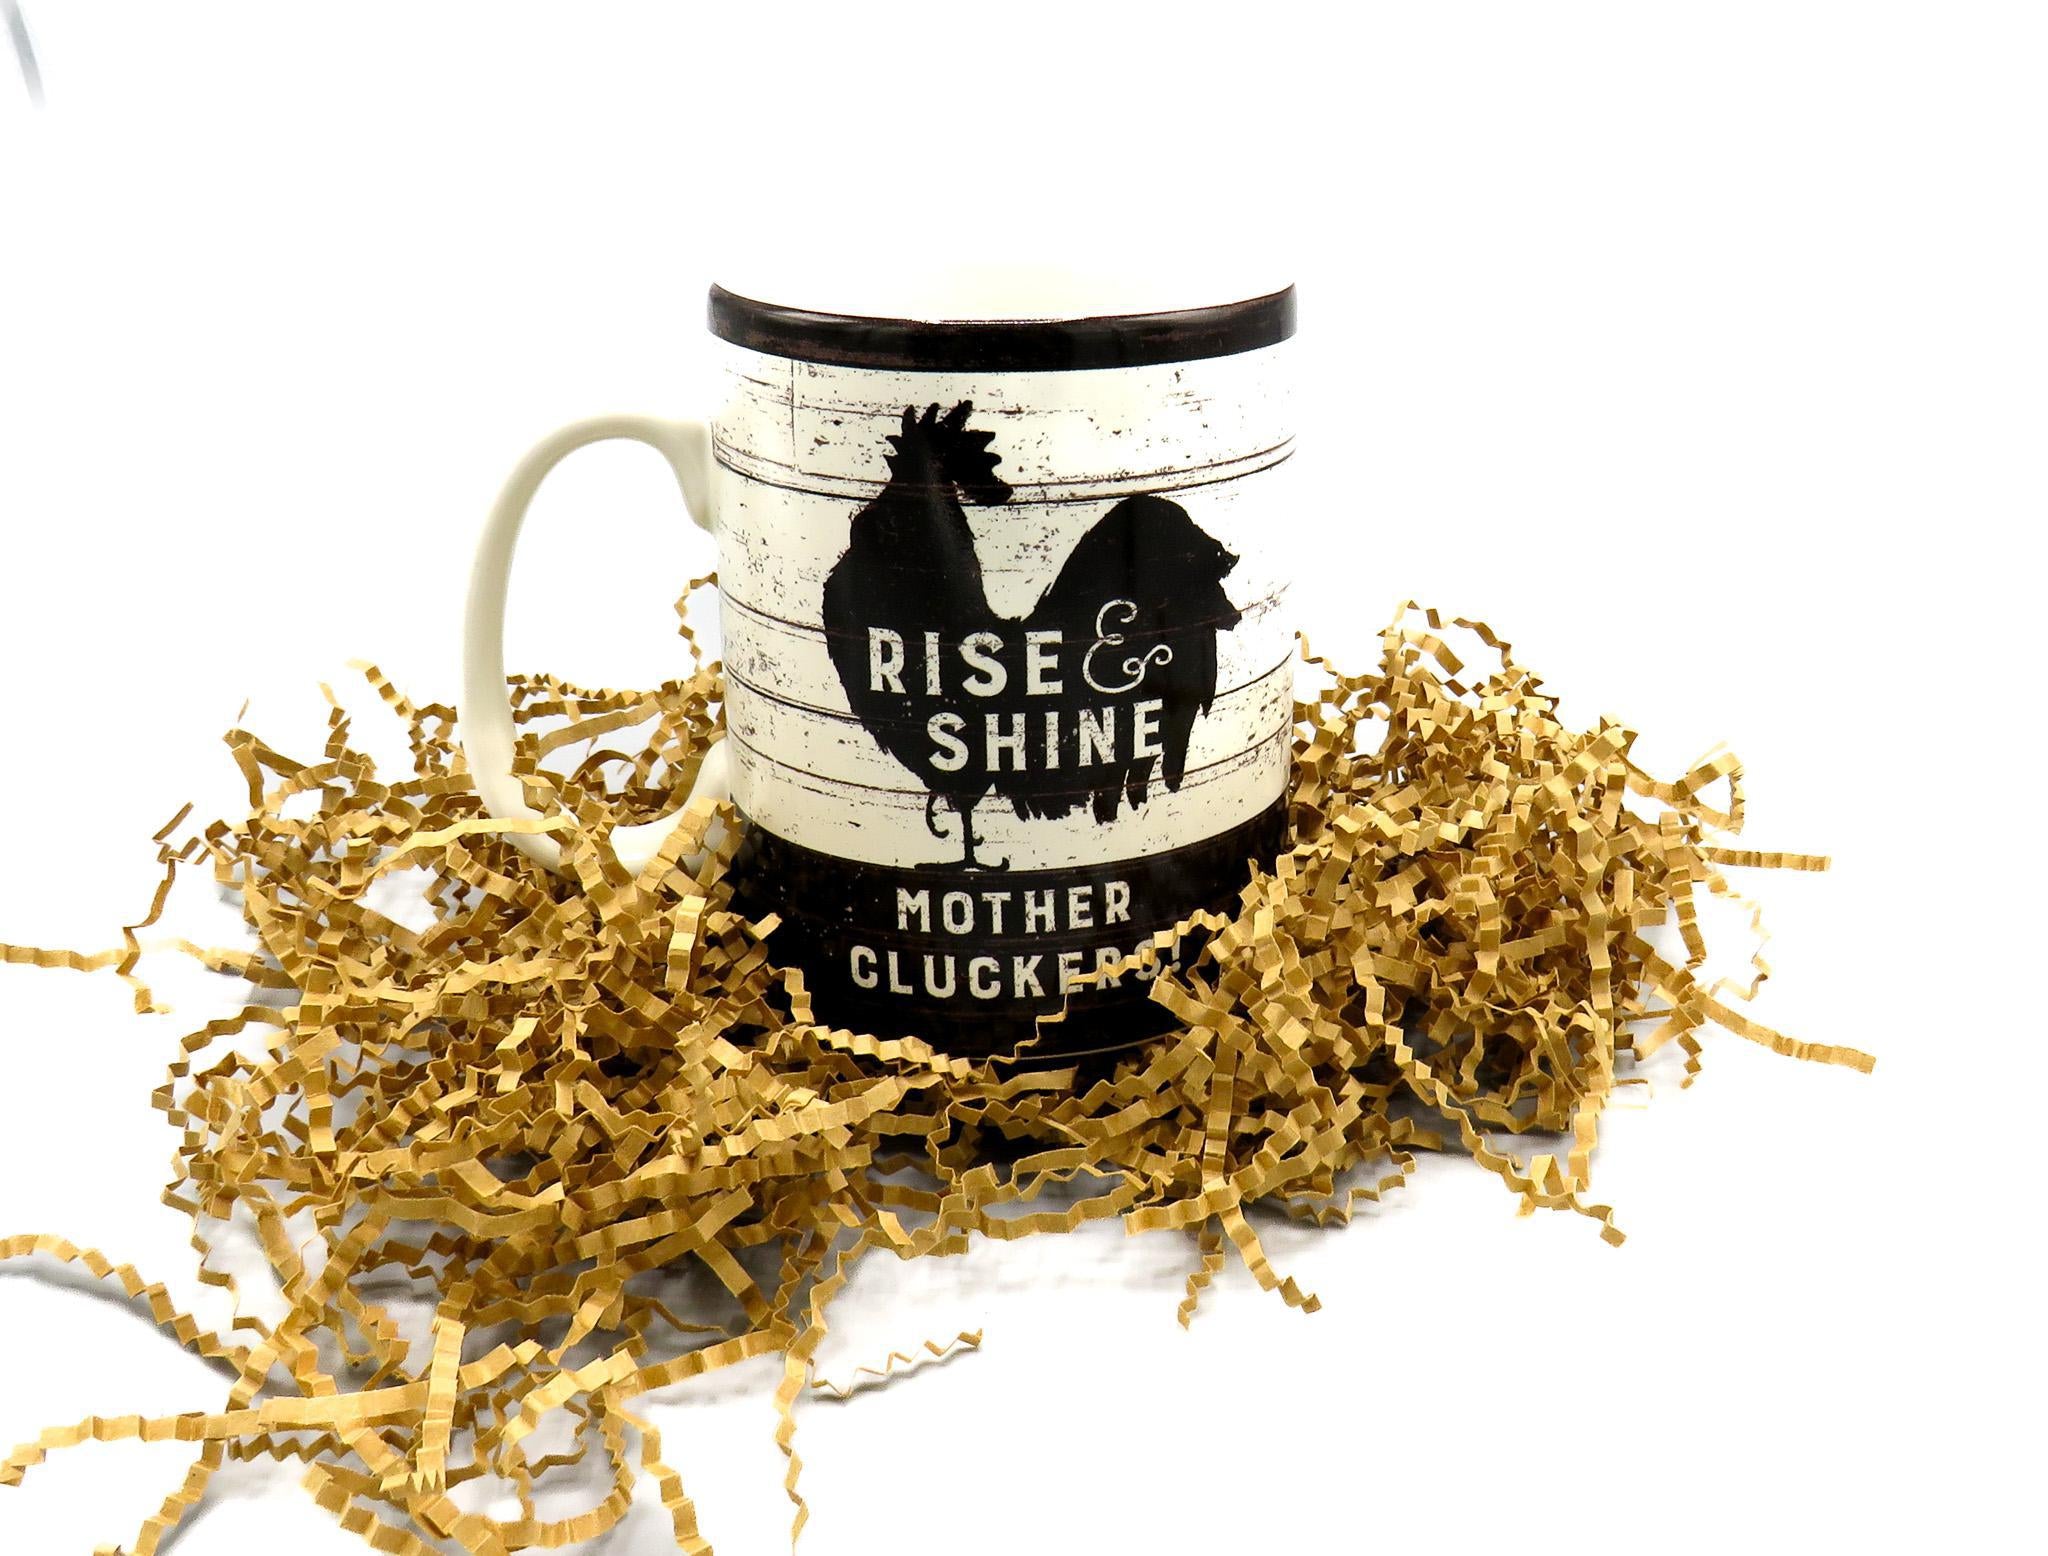 "What The Cluck?" Deluxe Treasure Gift Box